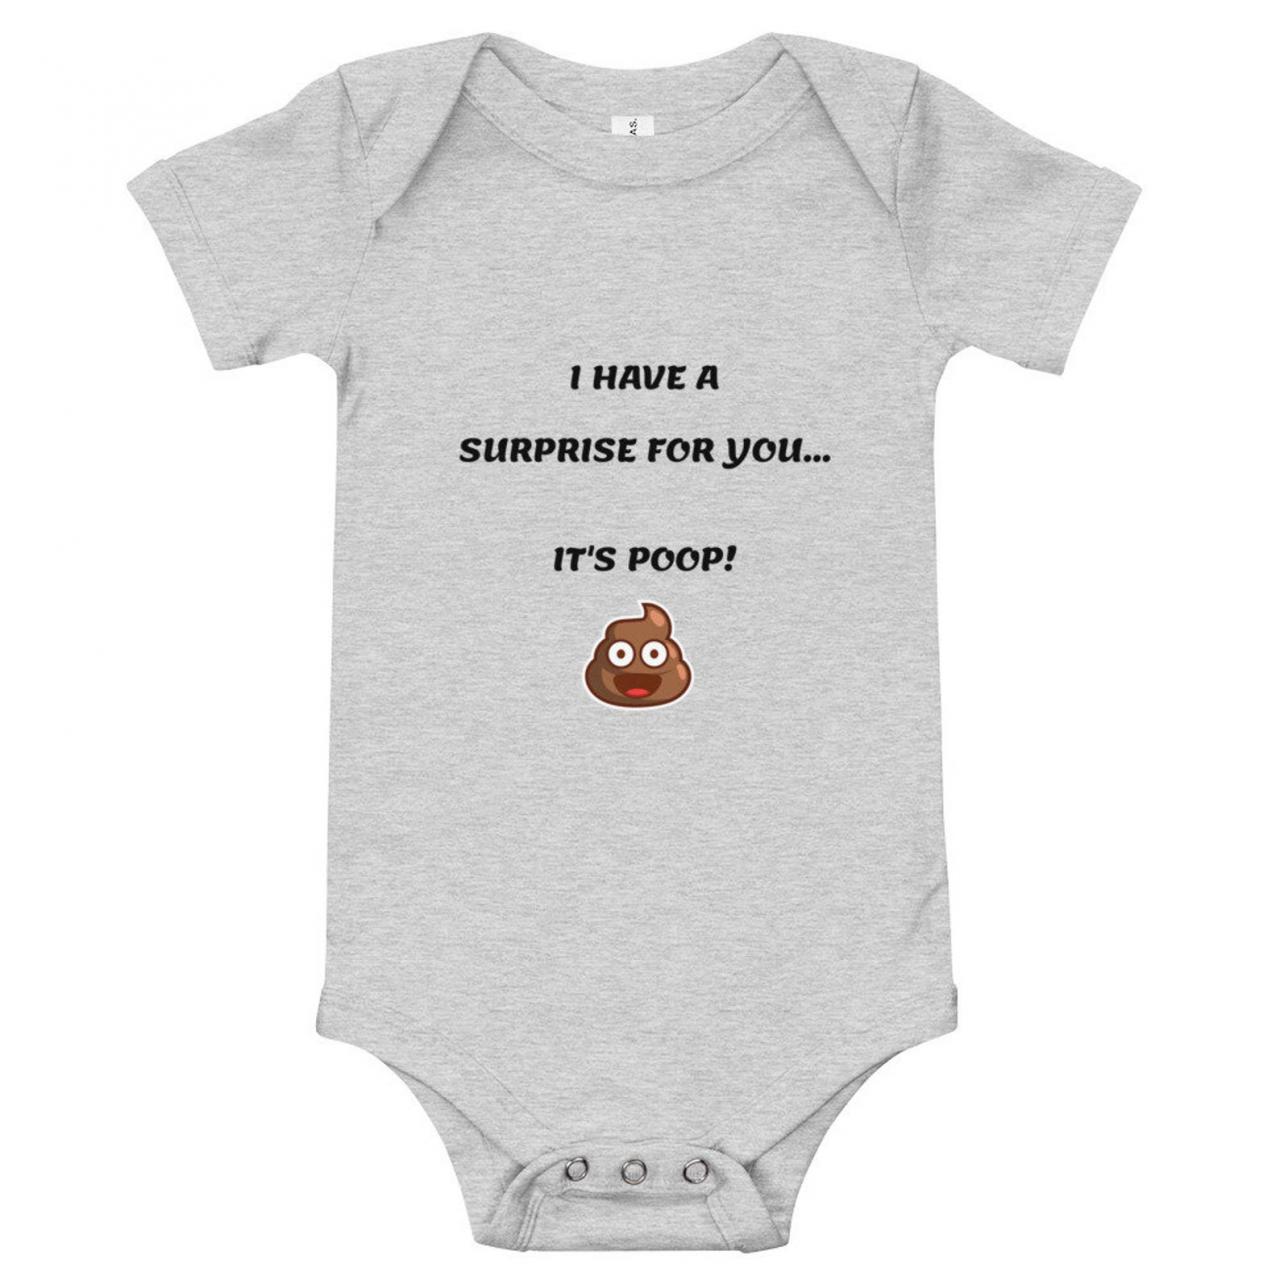 I Have A Surprise For You, Its Poop Funny Baby Onesies®, Baby Shower Gift, Funny Baby Bodysuit